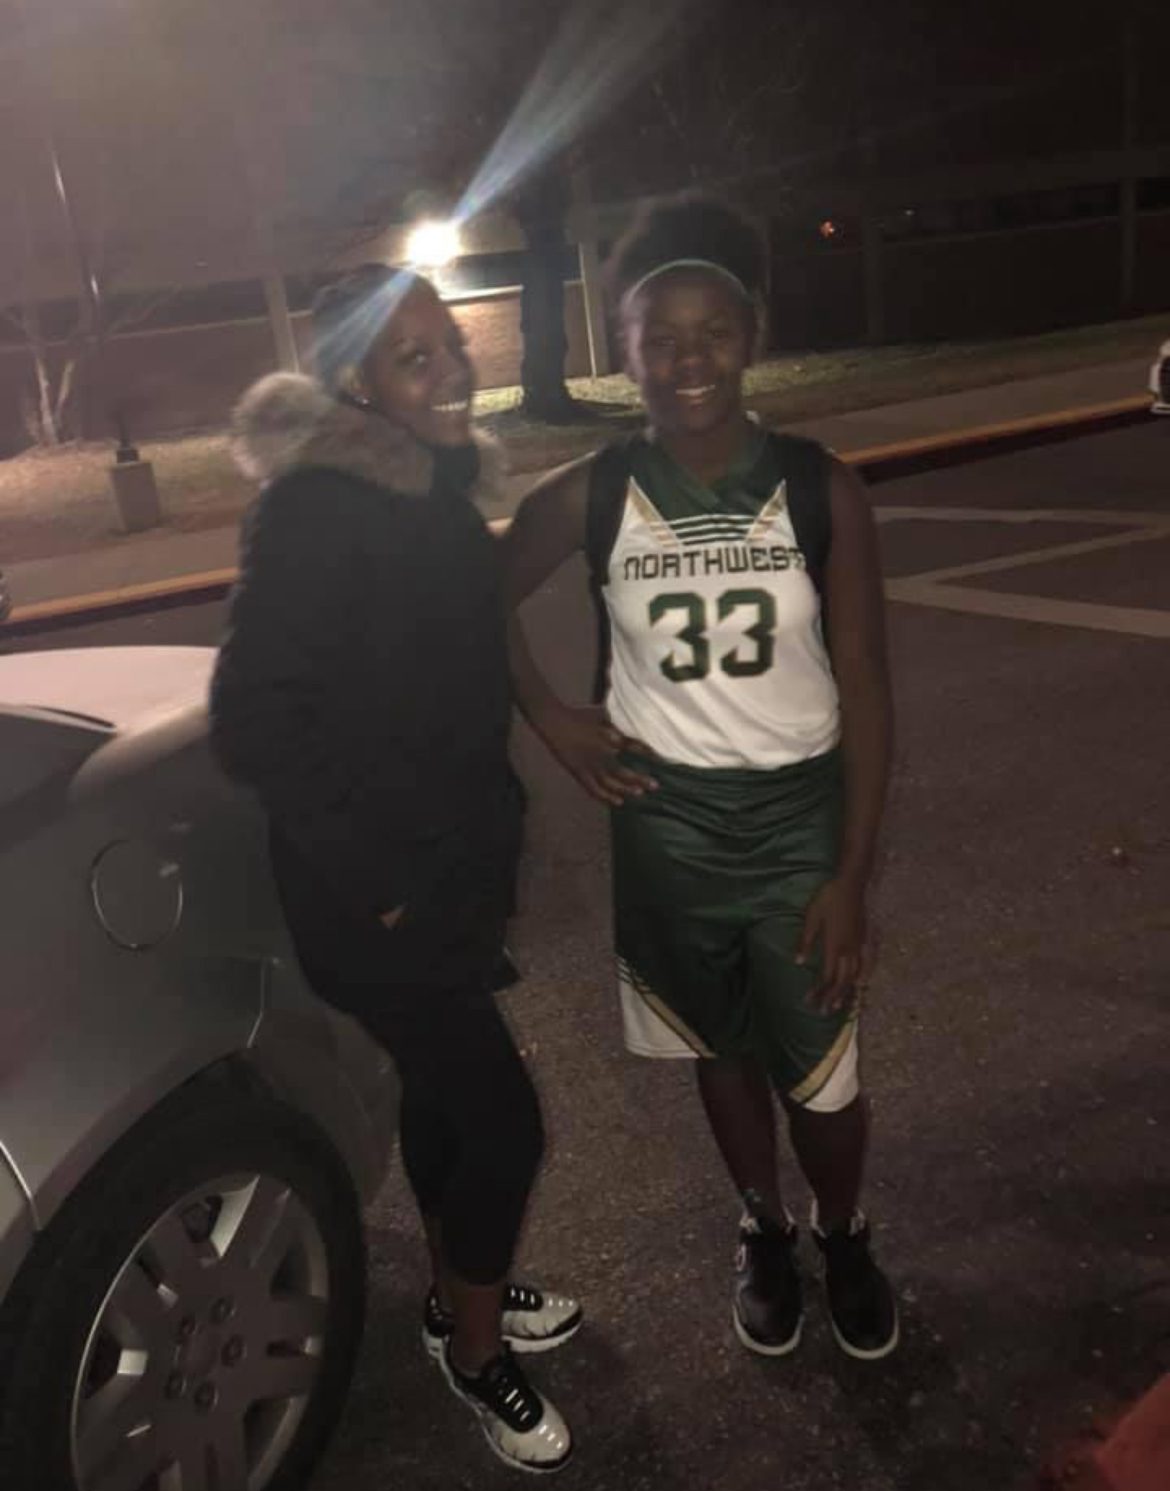 Photo shows Serenity in a basketball uniform, smiling next to her sister Sharde, outside in a parking lot after a game.